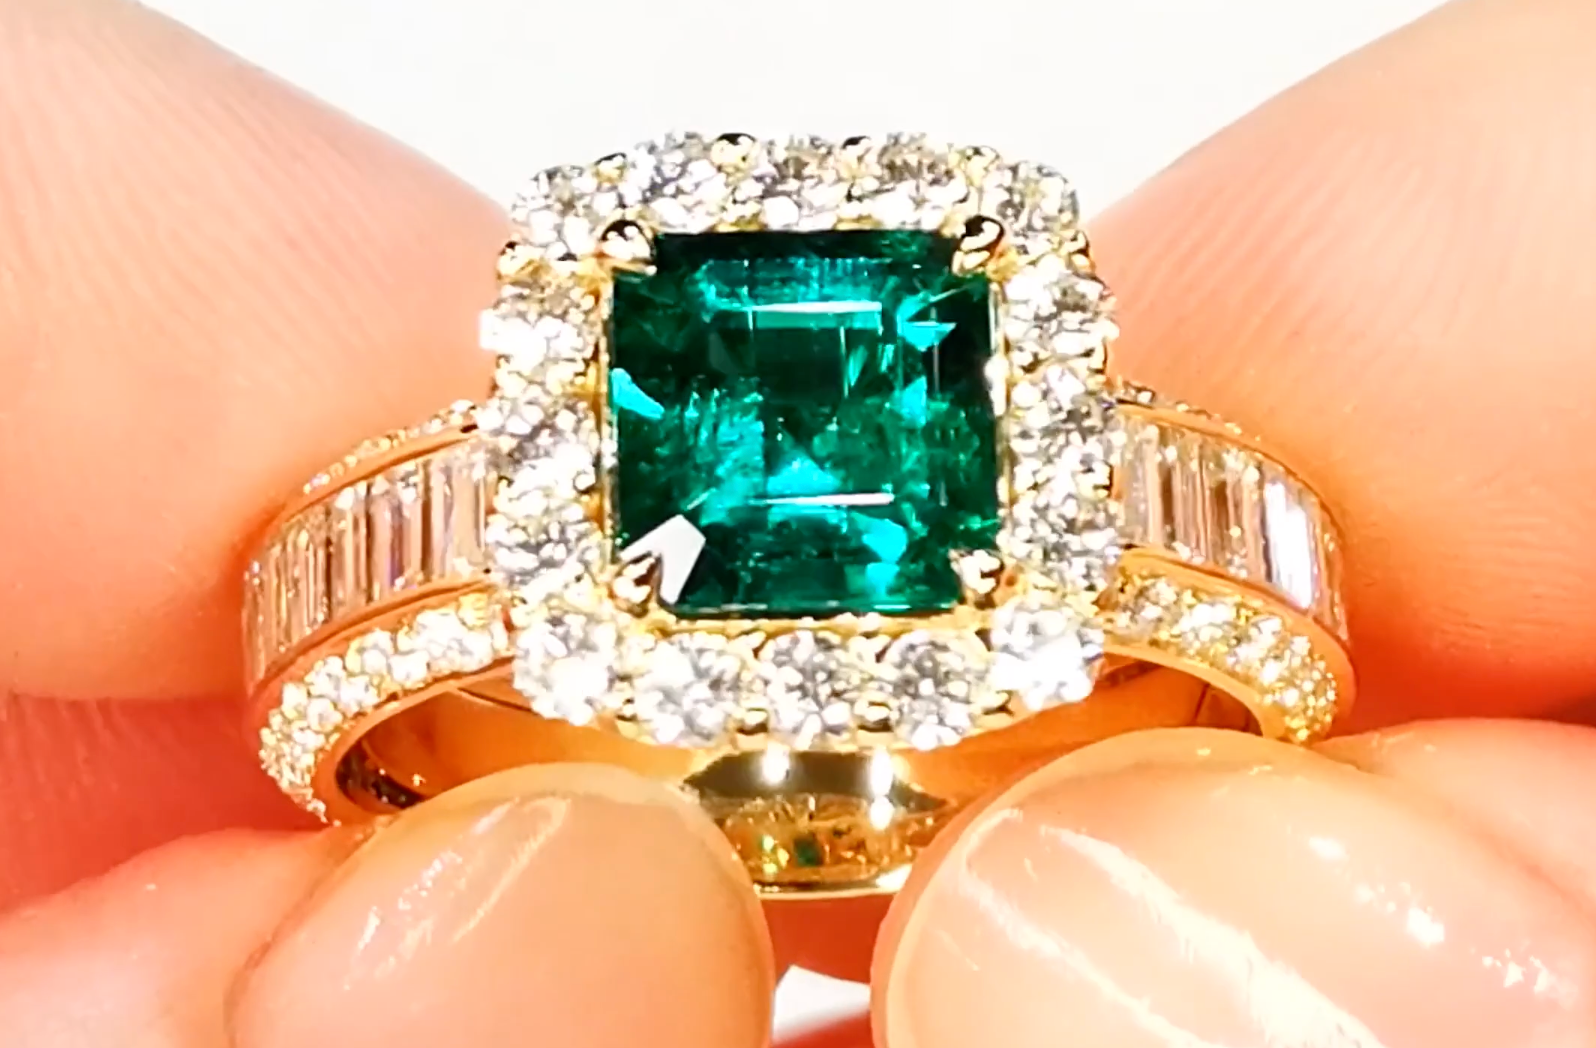 1.48ct Old World Muzo Colombian Emerald Ring with D Flawless Diamonds set in 18K Yellow Gold